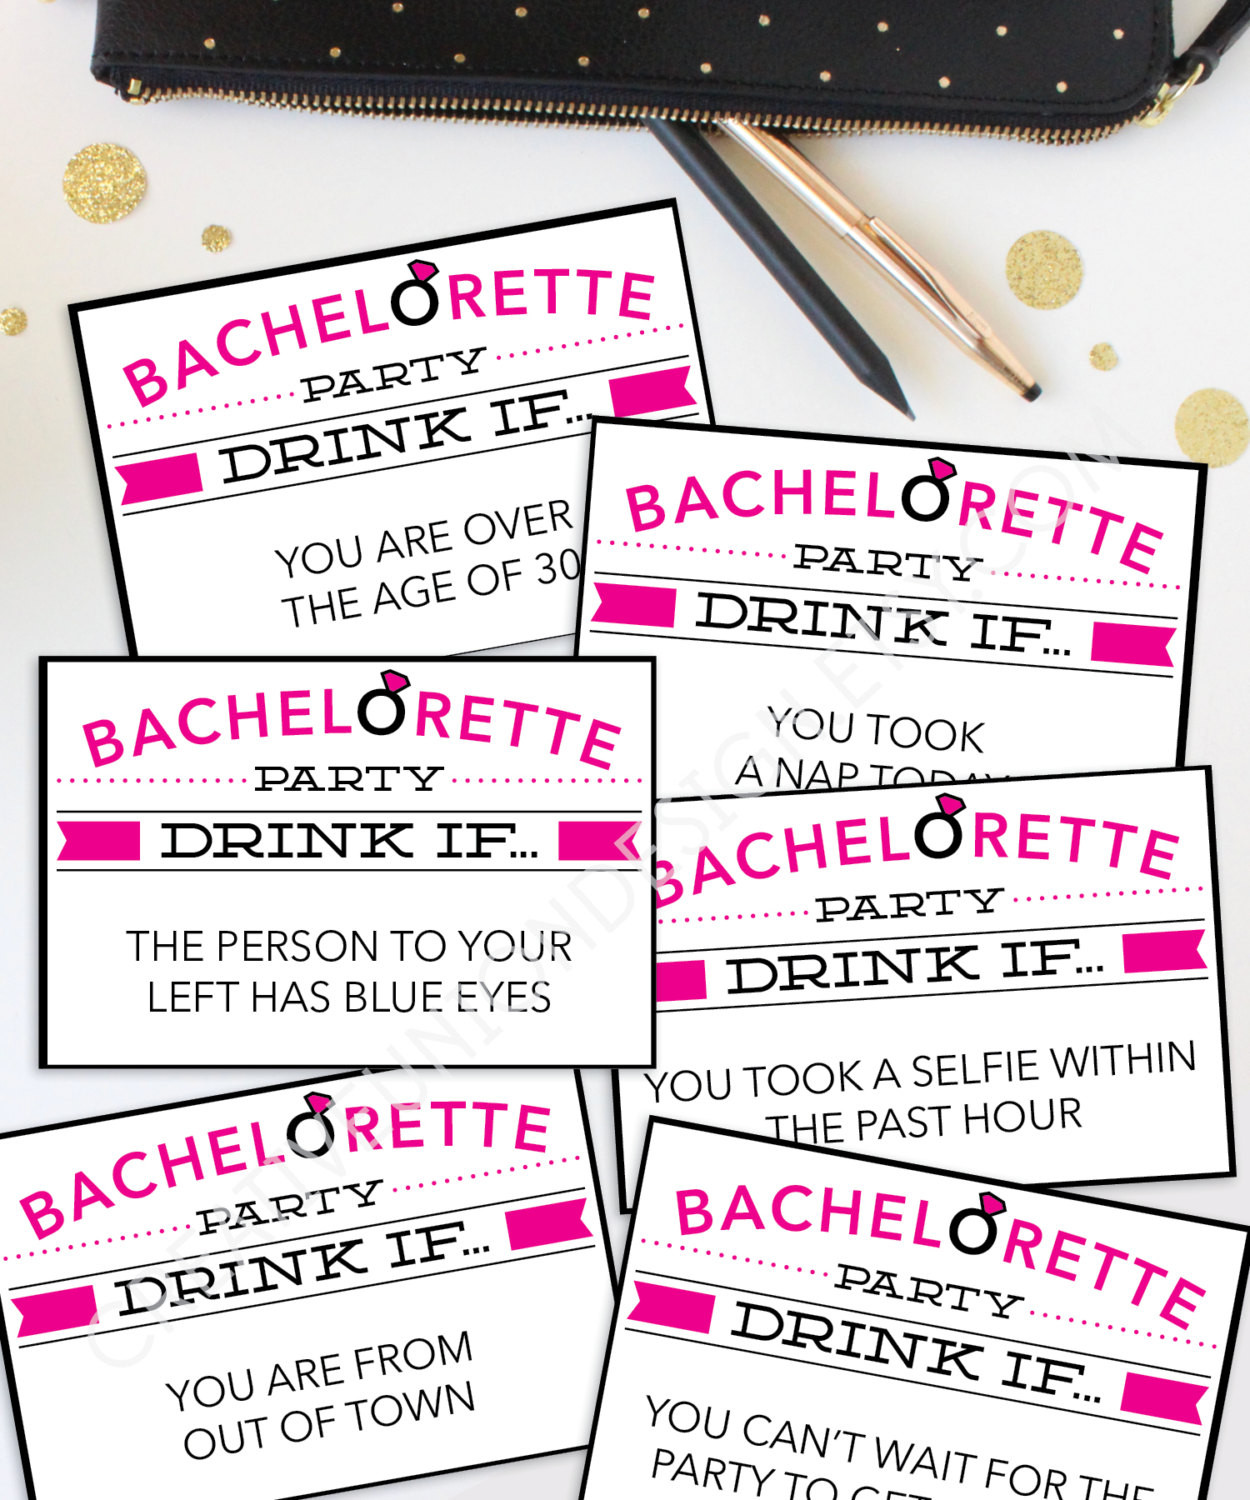 Bachelorette Party Game Ideas
 Bachelorette Party Game Drink If Game Printable